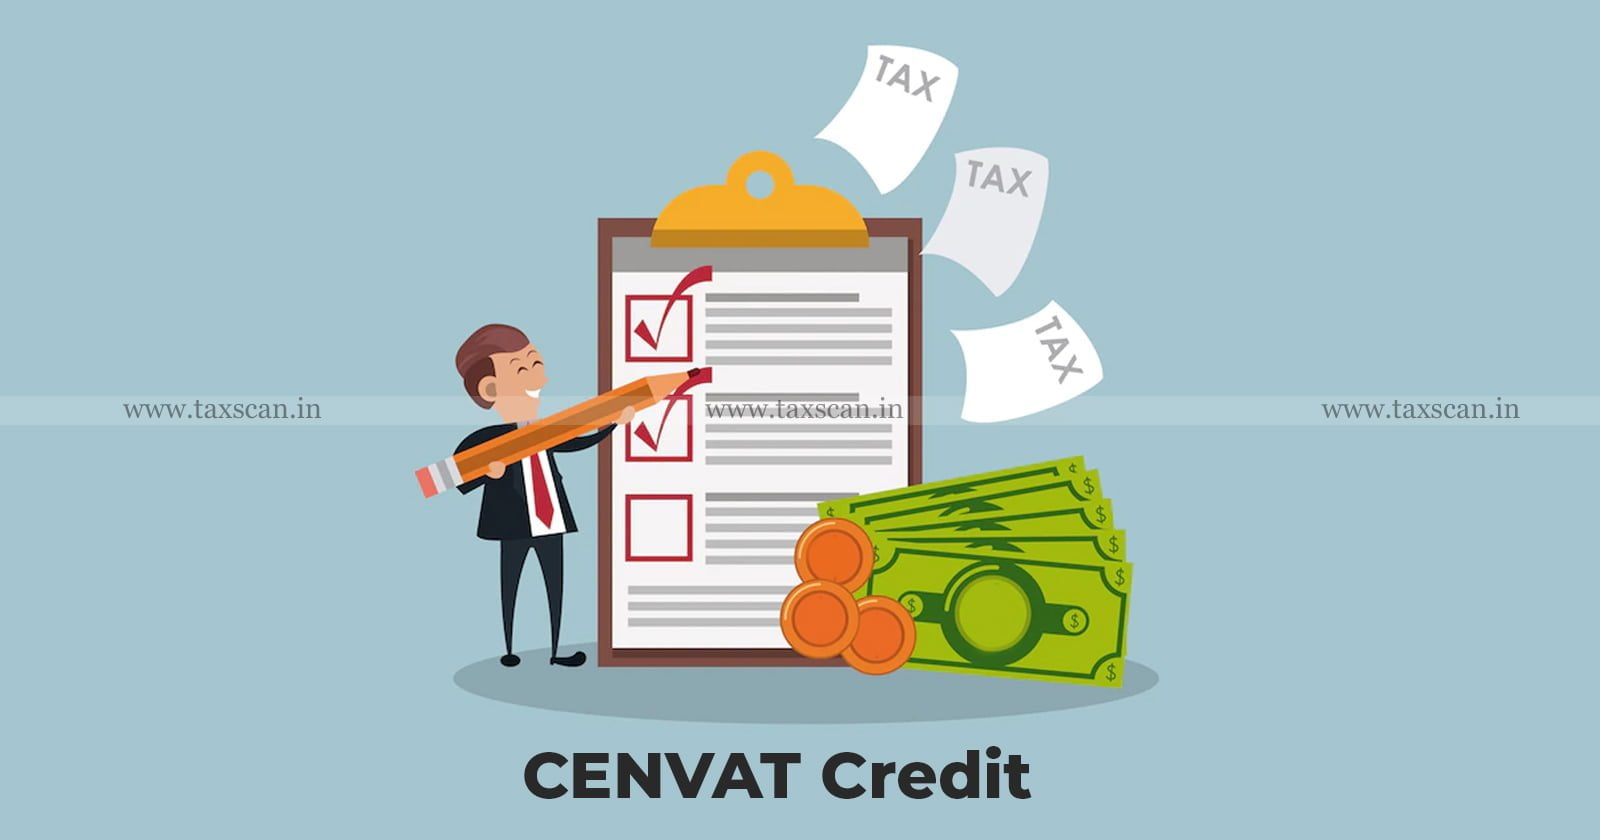 CENVAT Credit - Inputs - Manufacturing - Final Products - Exempted - Excise Duty-CESTAT - Demand -CENVAT Credit-TAXSCAN